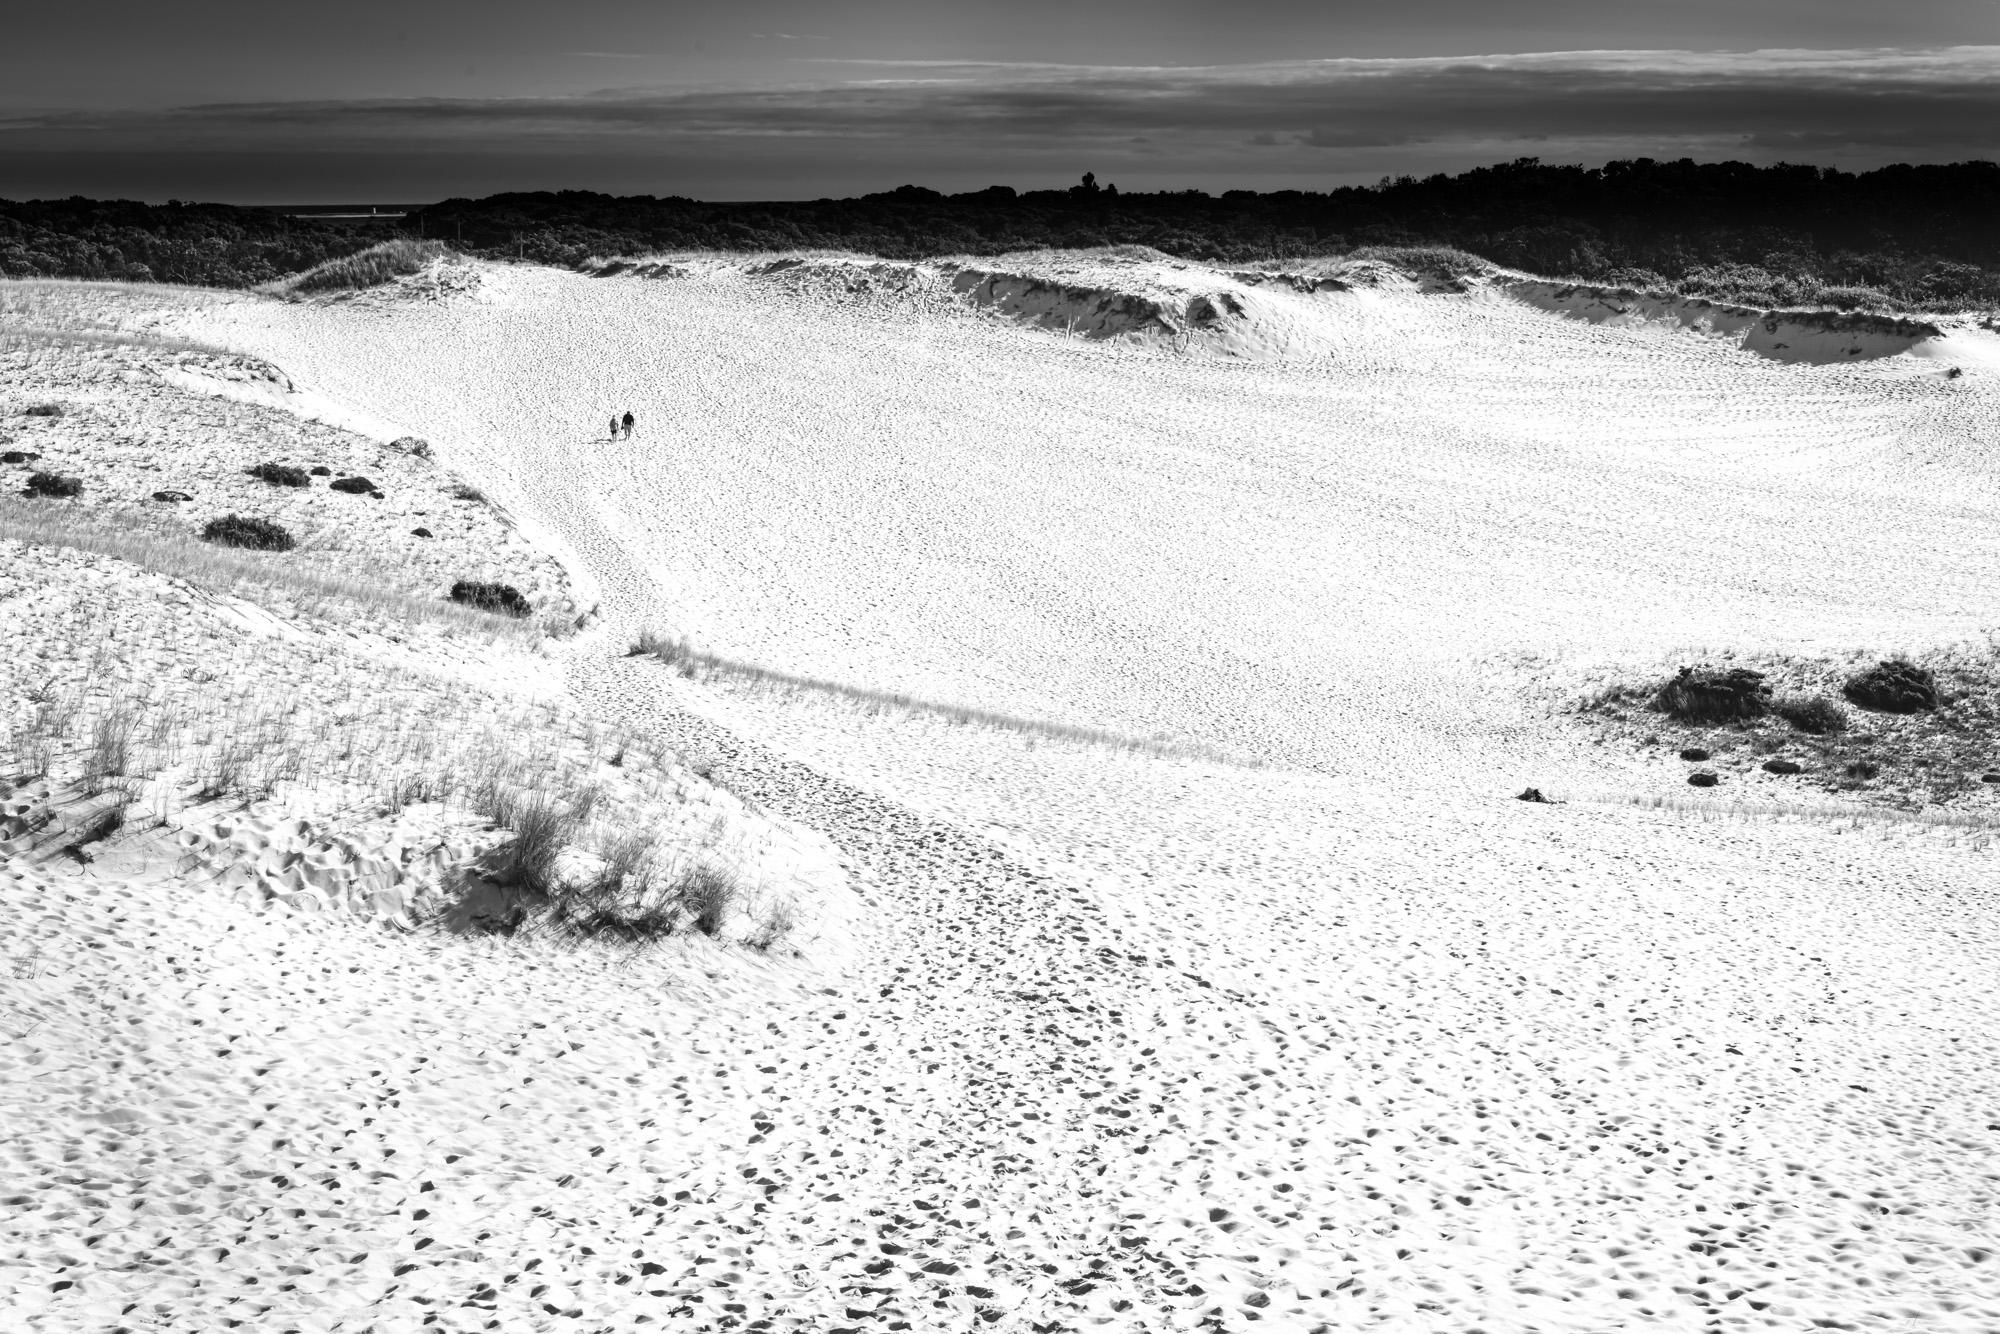 Limited edition black and white photograph on archival pigment print. Photographed on Cape Cod, MA in the Provincelands. These famous dunes can be a lot larger and hotter than they look but a great hike.

About:
Lewis’ artistic practice often